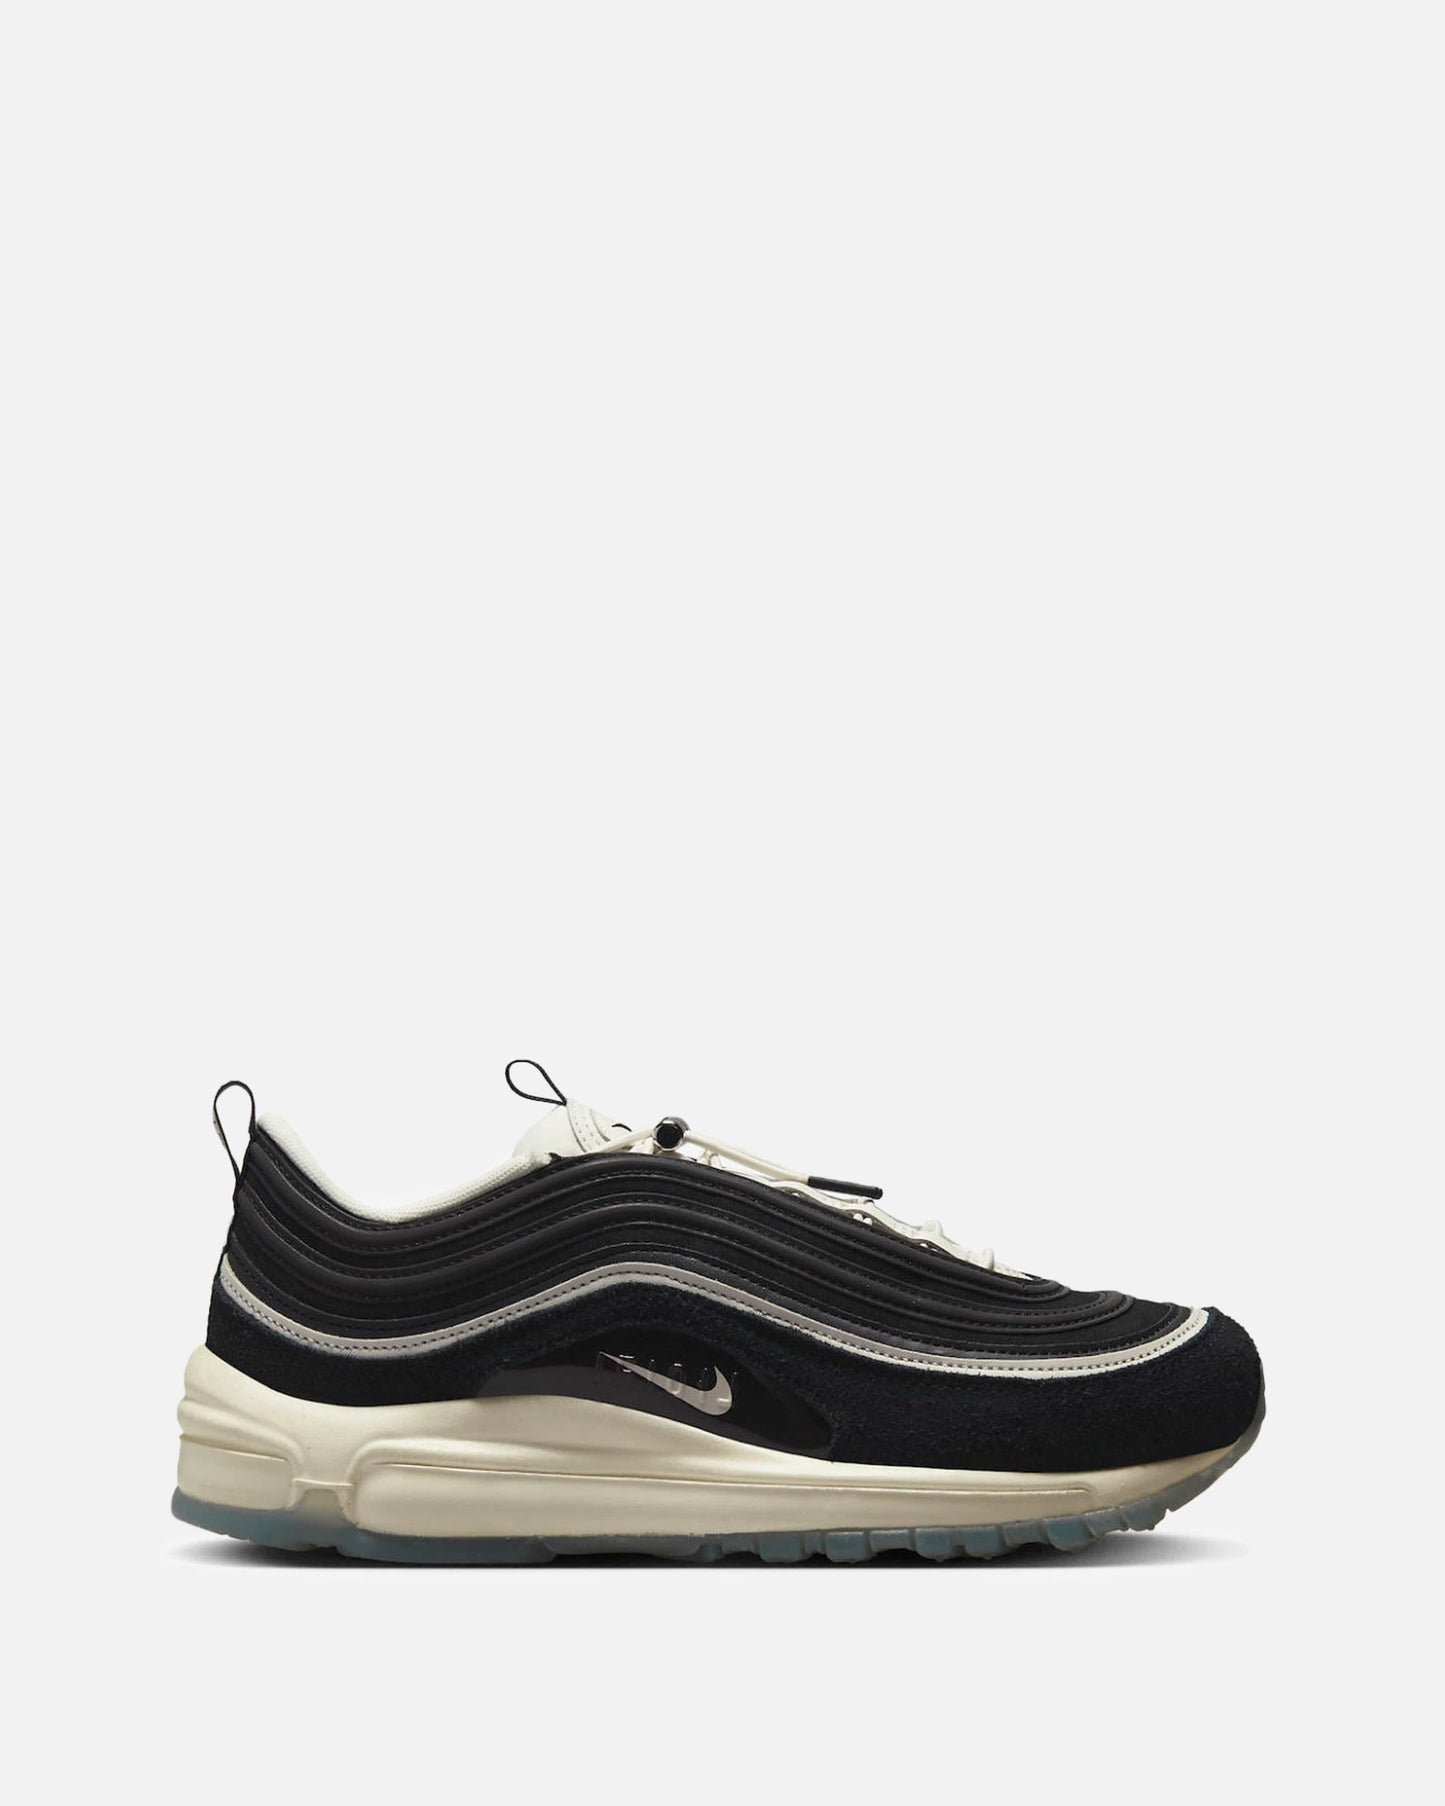 Nike Releases Air Max 97 'Hangul Day'